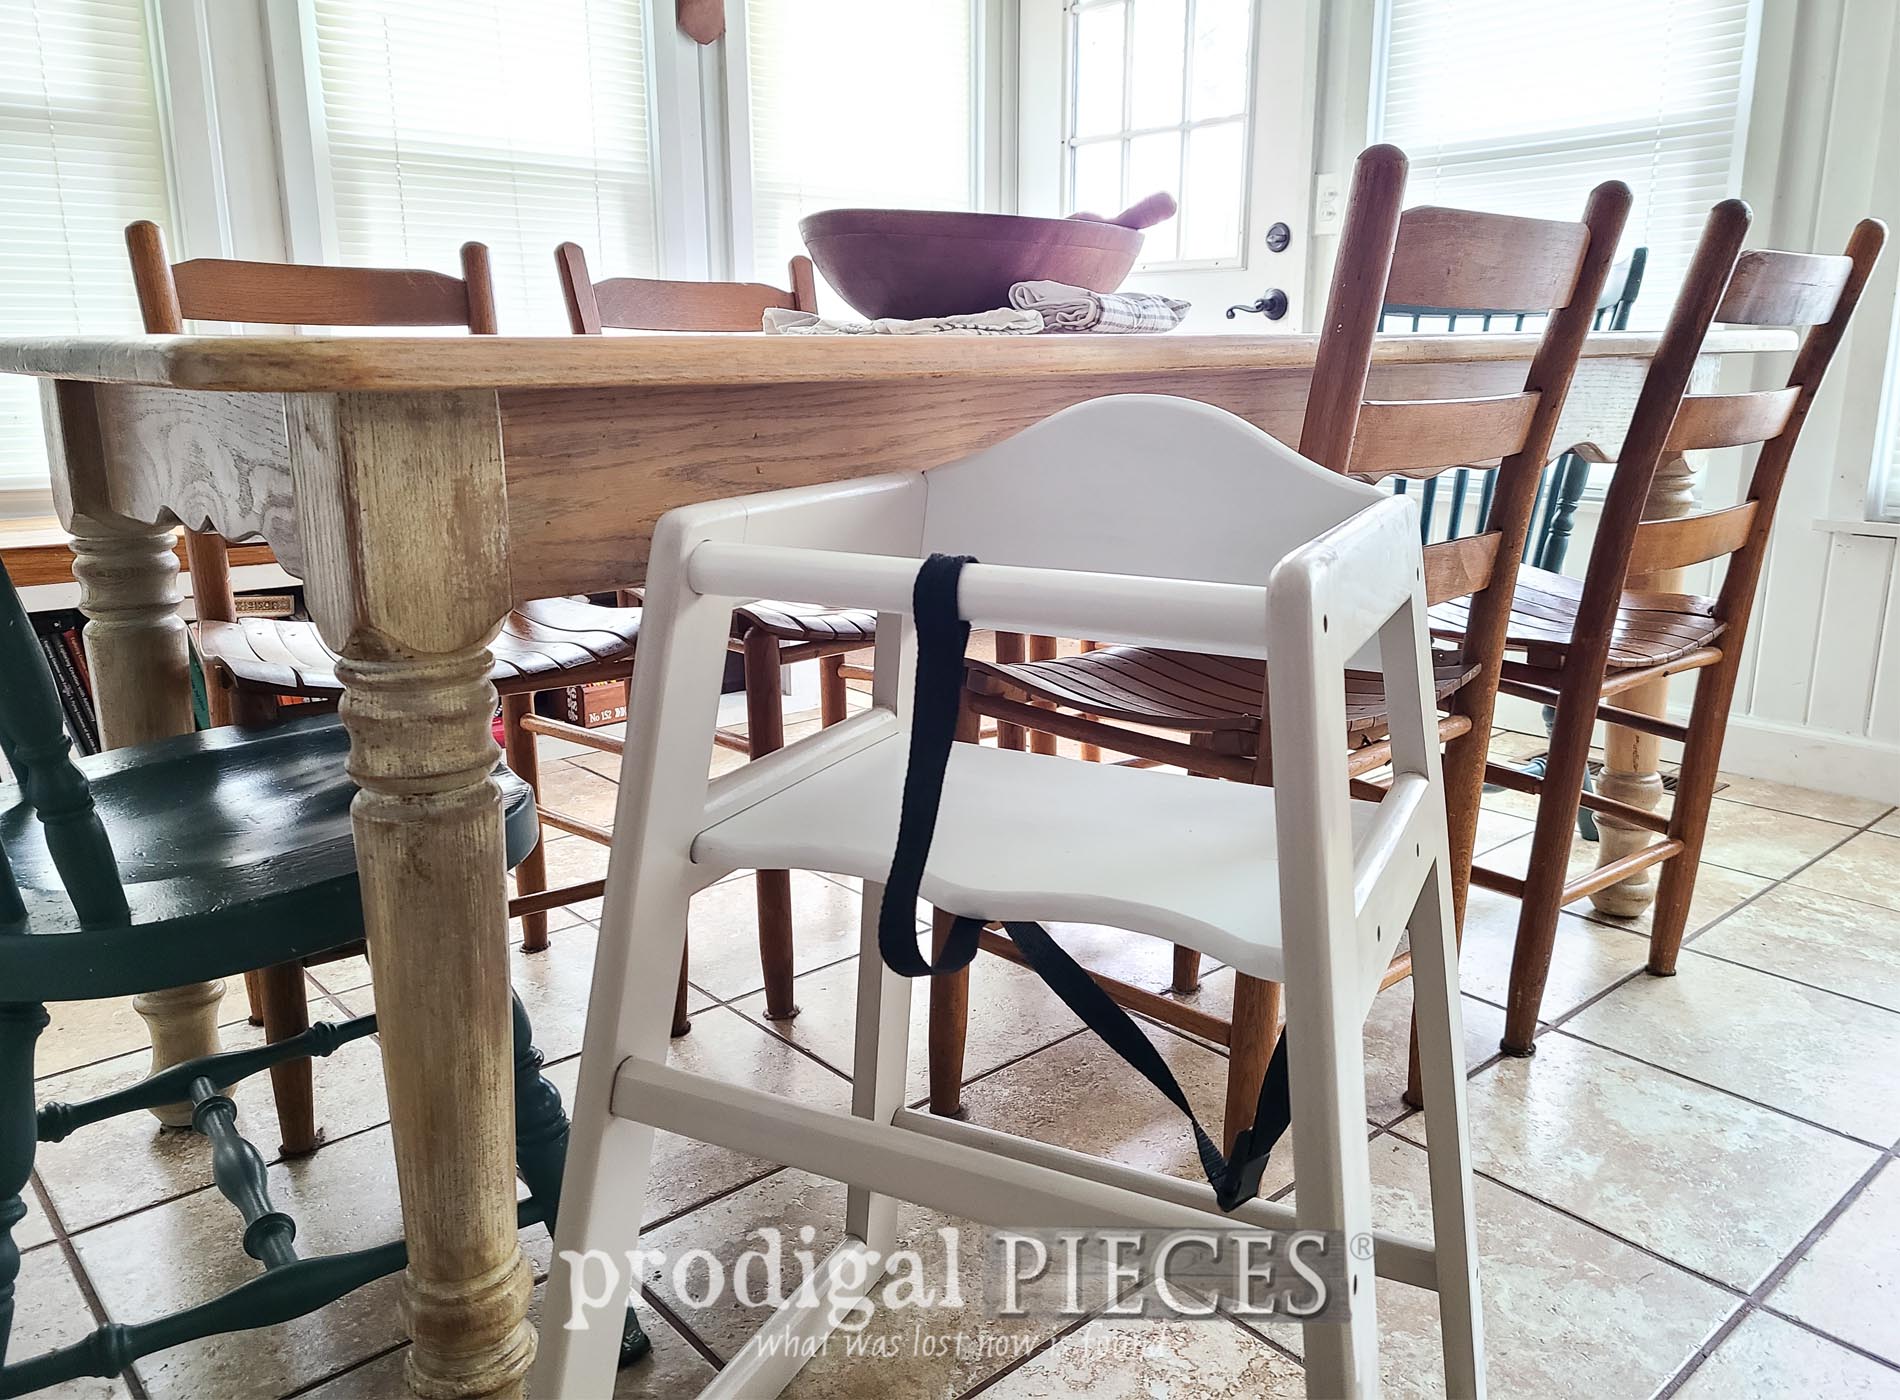 Featured DIY Painted Highchair by Larissa of Prodigal Pieces | prodigalpieces.com #prodigalpieces #farmhouse #diy